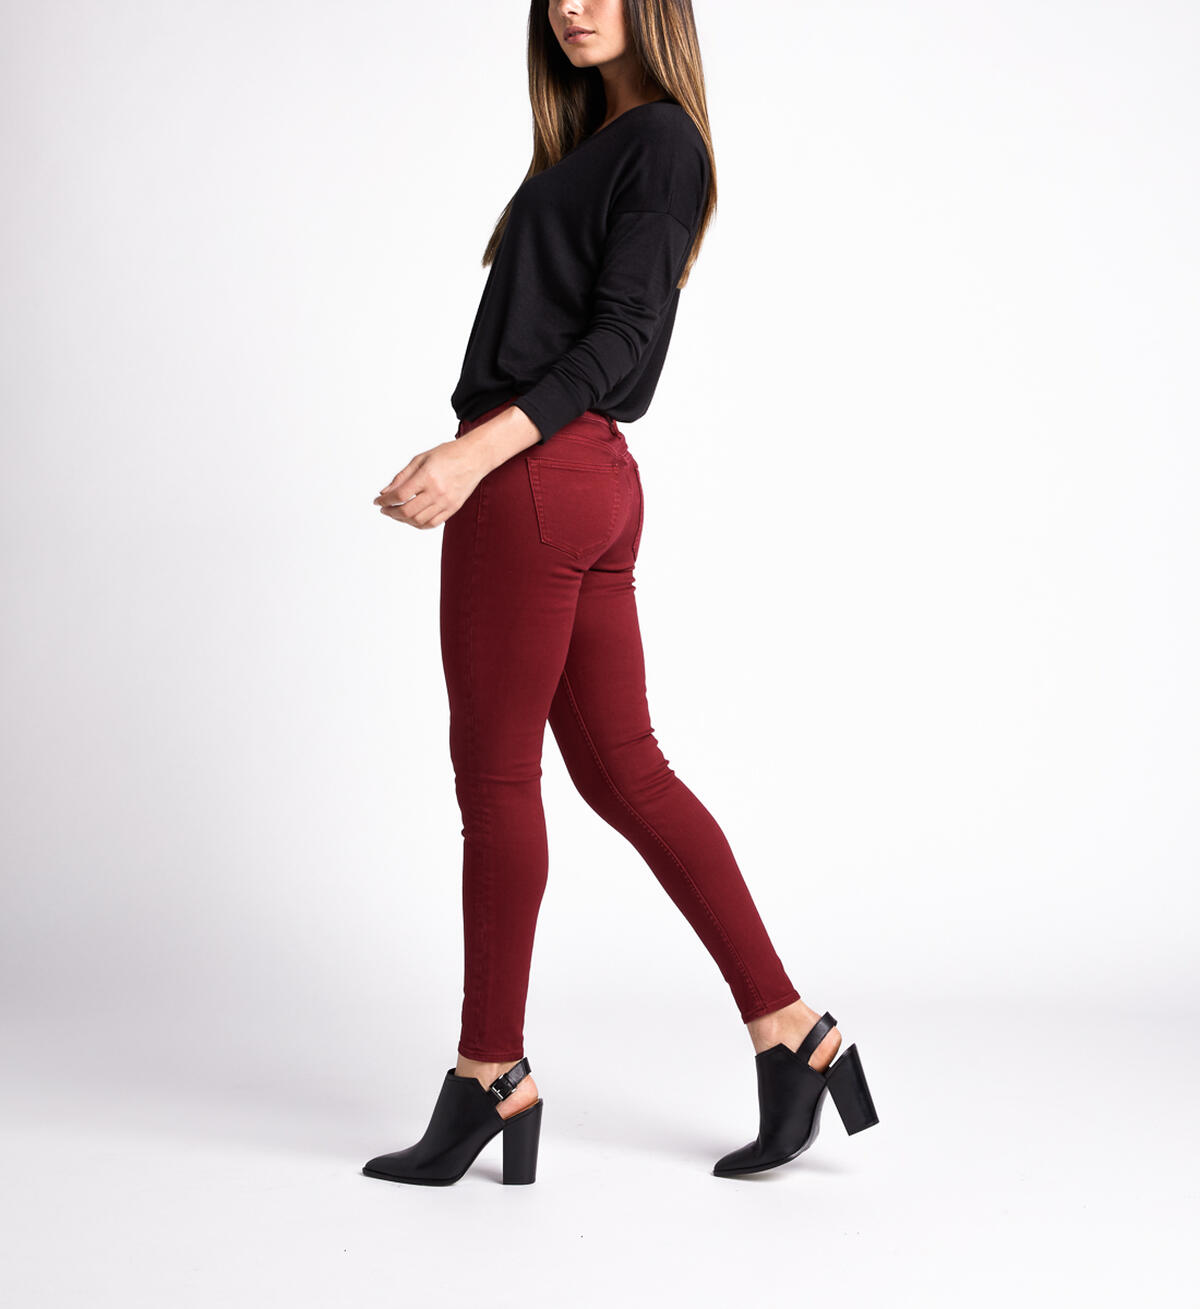 Most Wanted Mid Rise Skinny Leg Pants, Red, hi-res image number 2